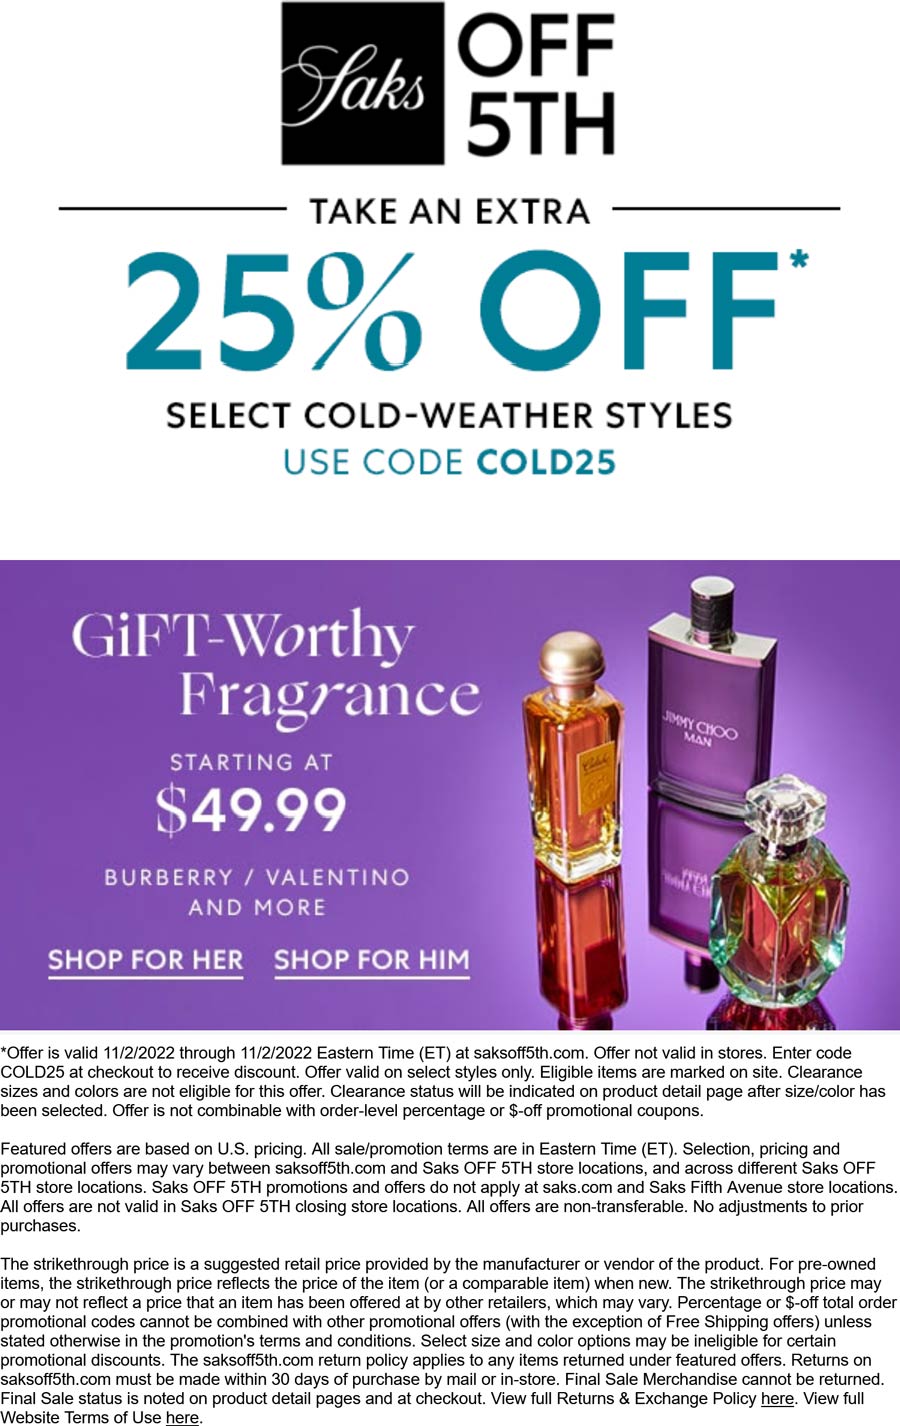 OFF 5TH stores Coupon  25% off cold weather styles today at Saks OFF 5TH via promo code COLD25 #off5th 